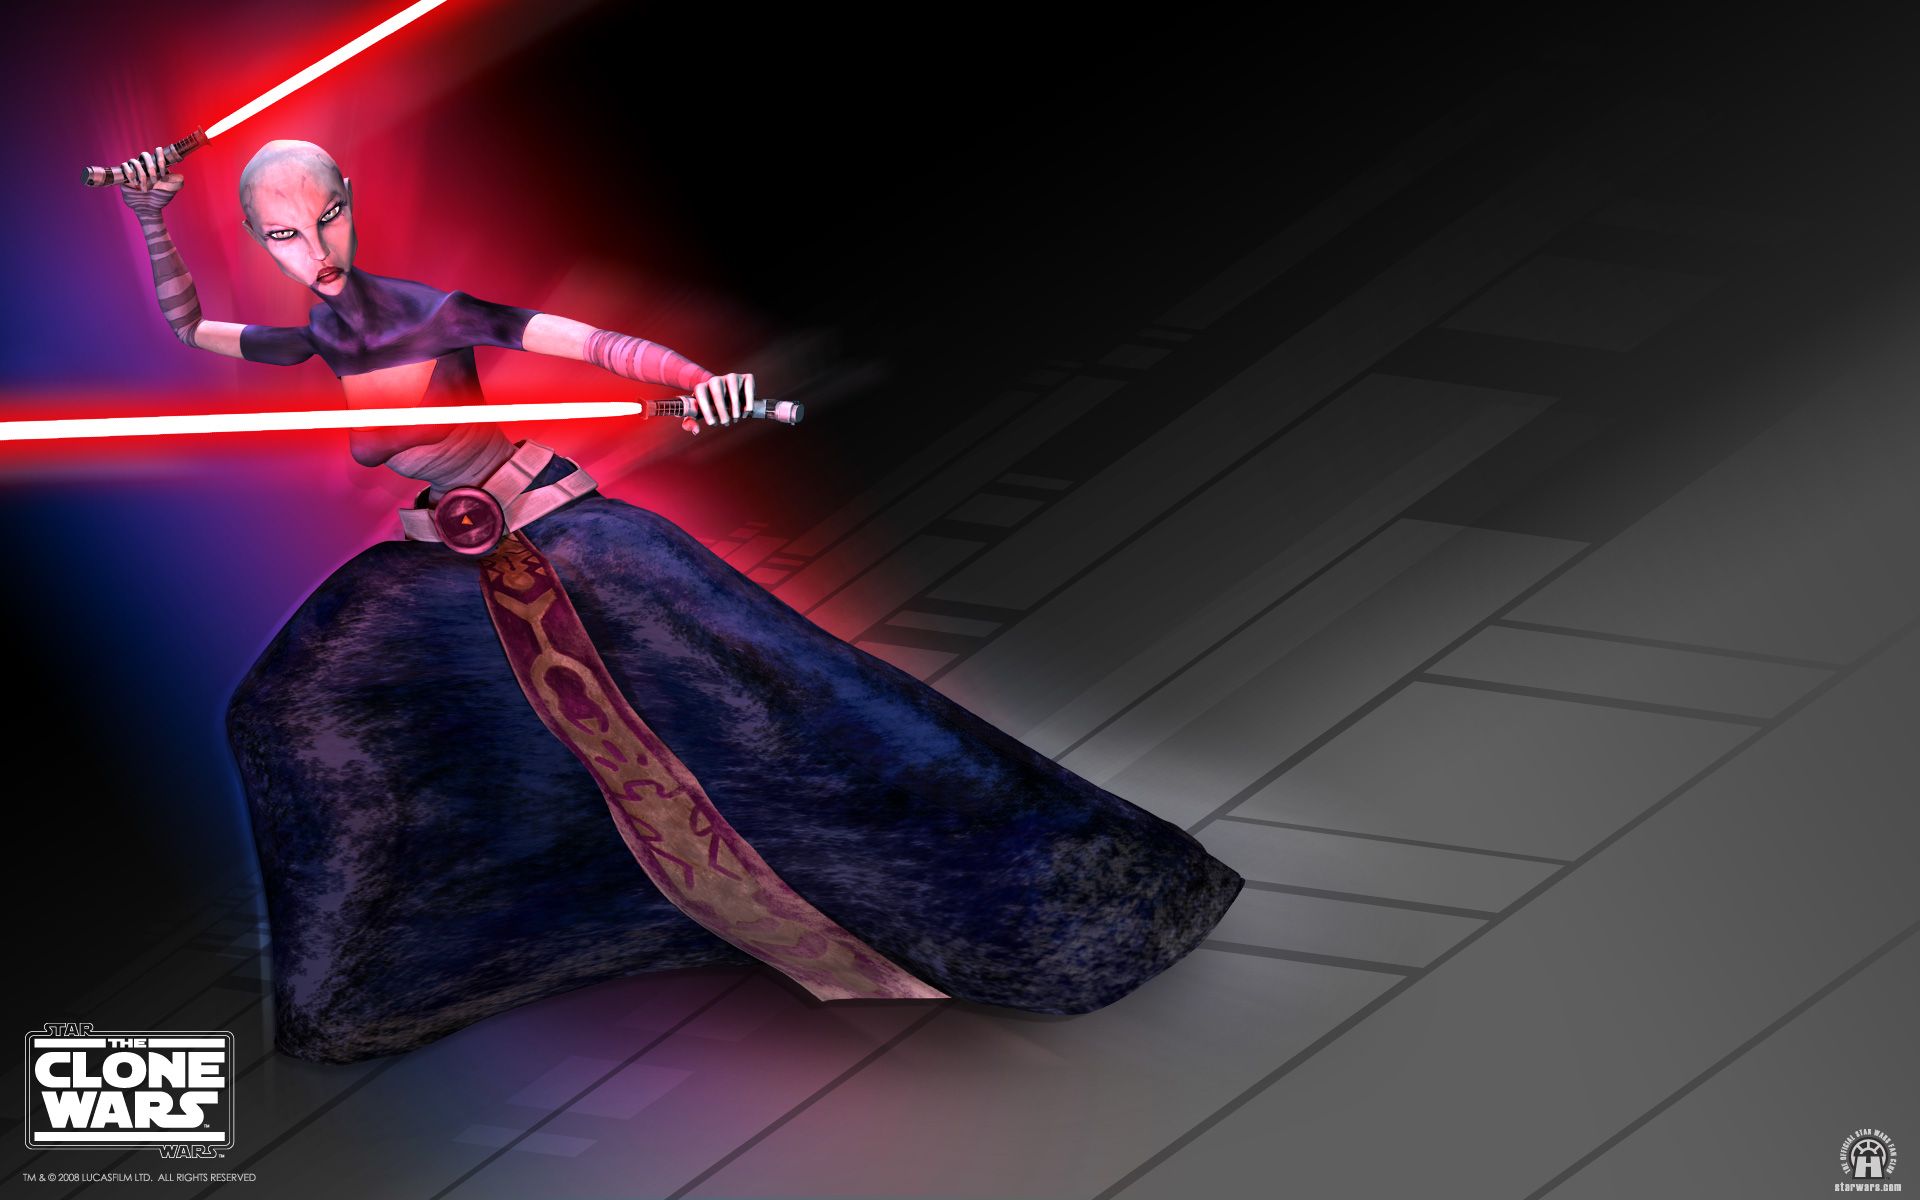 Ventress 4K wallpaper for your desktop or mobile screen free and easy to download